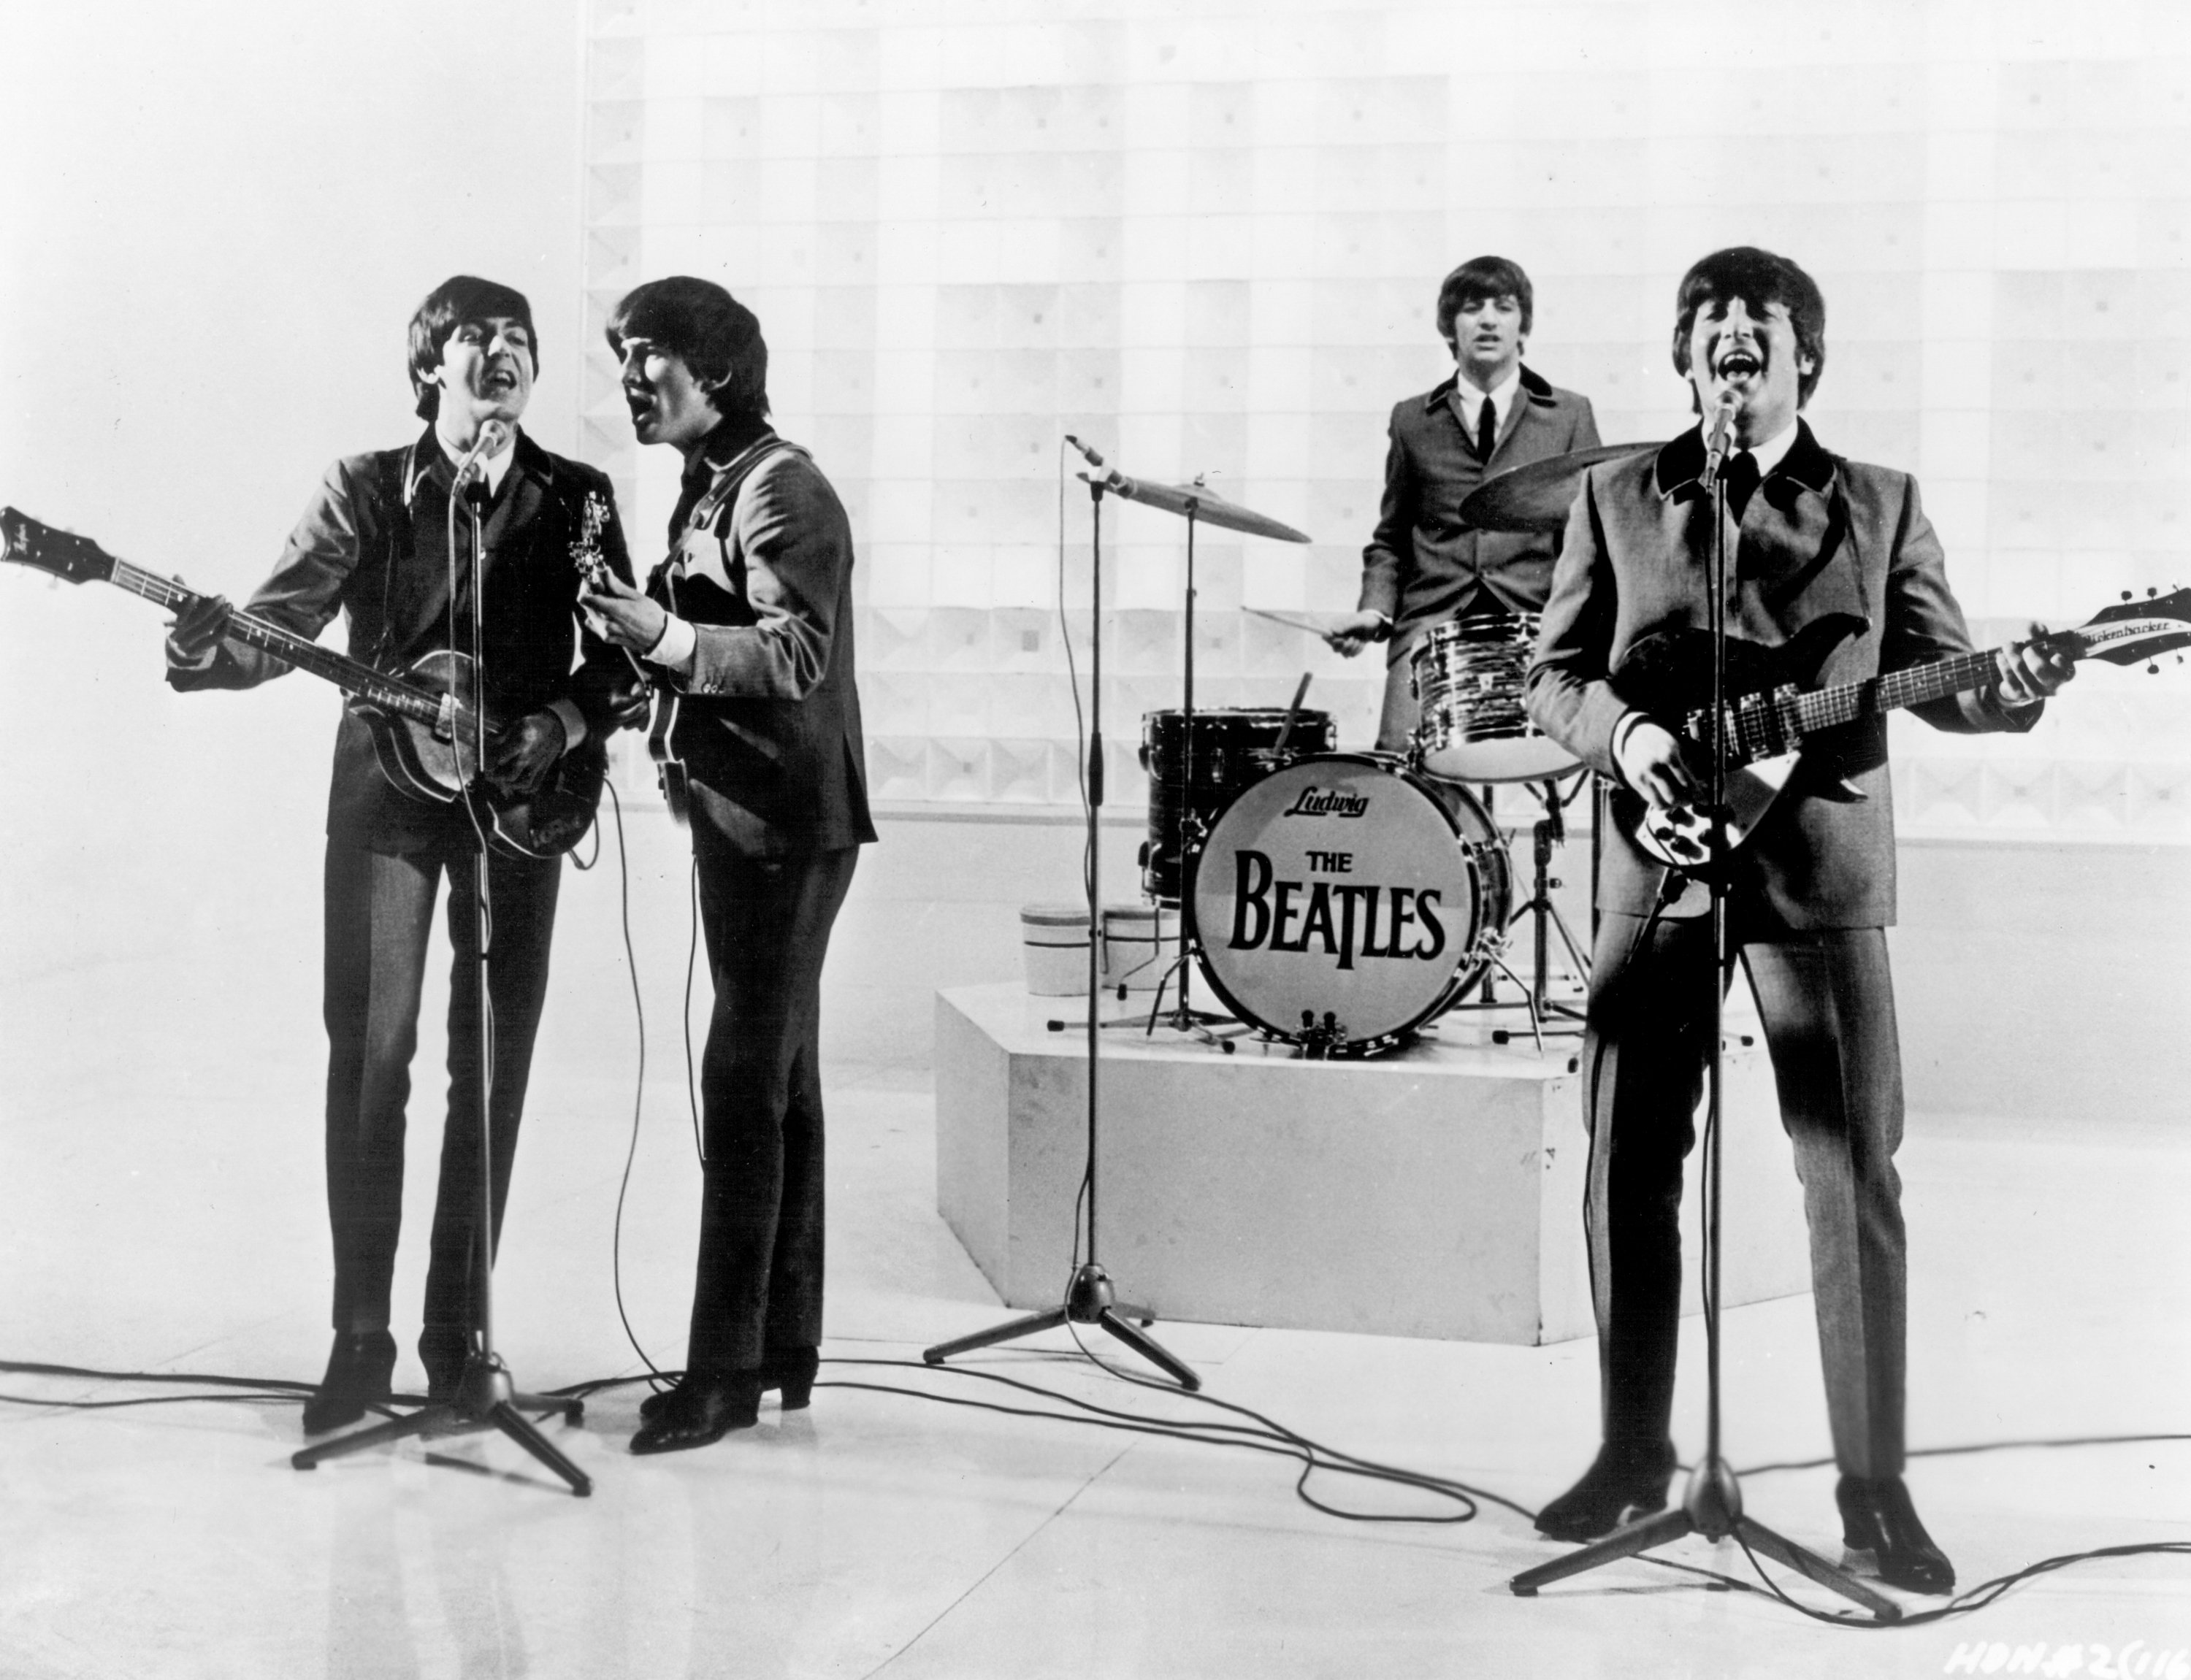 The Beatles play instruments